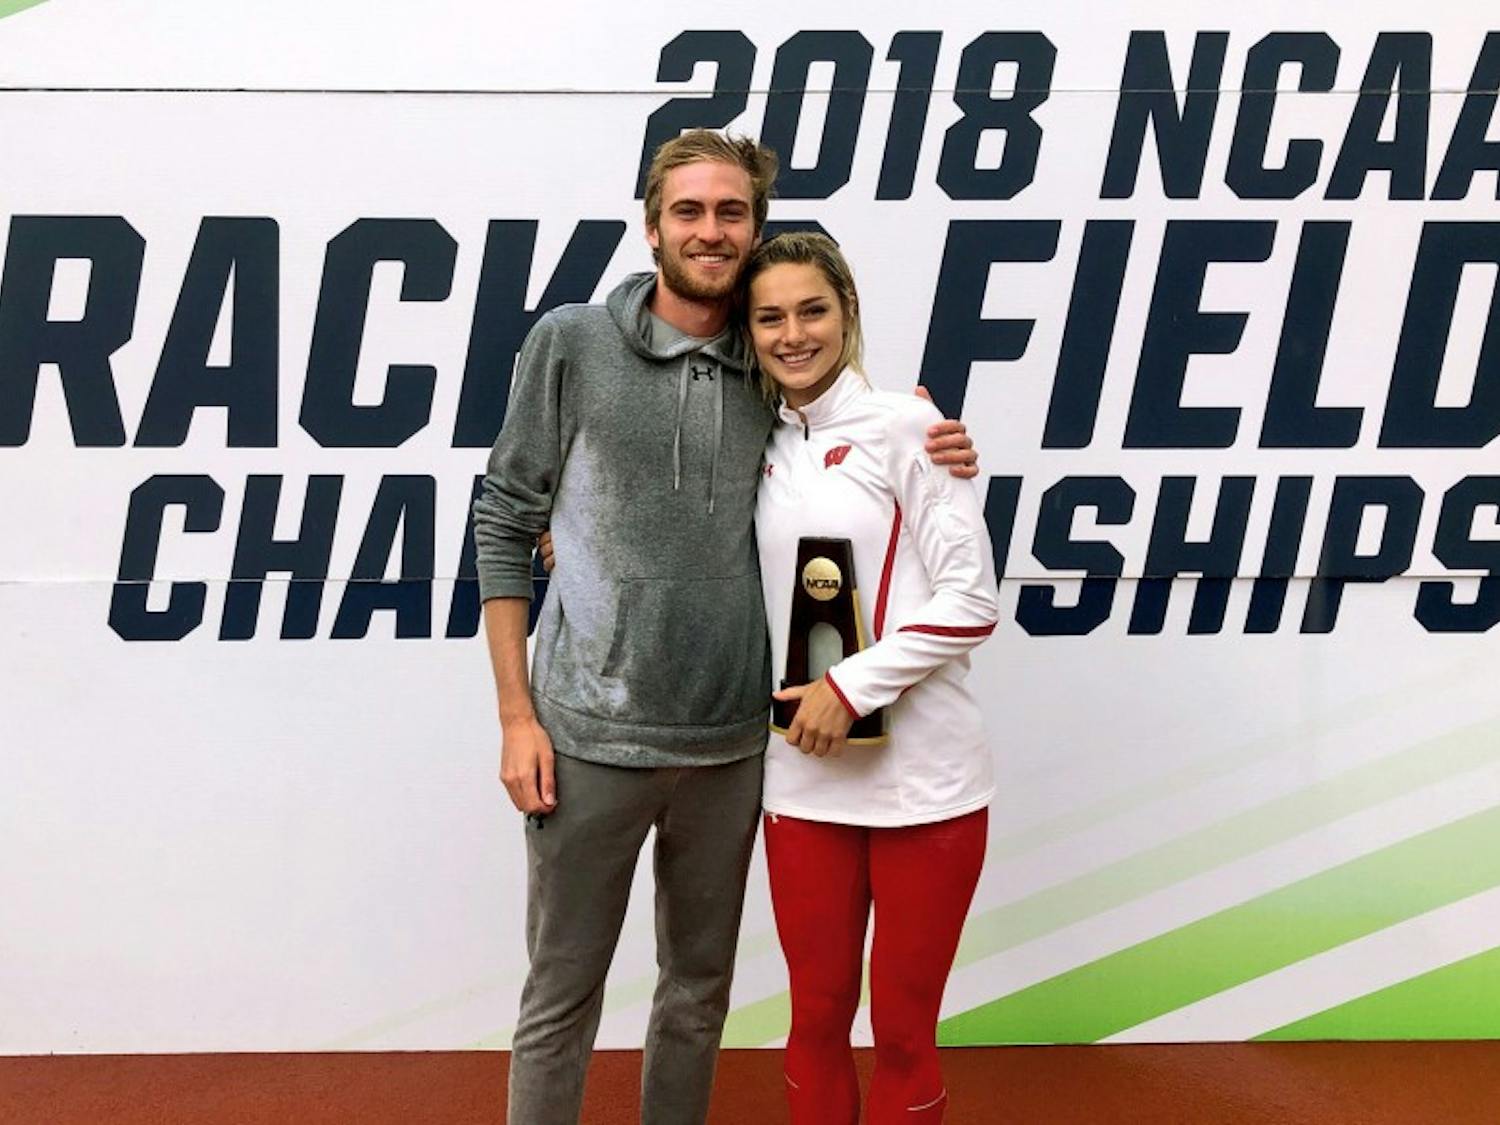 With titles in the men's 1500 and women's heptathlon, Wisconsin was one of only five schools with a men's and women's individual national champion.